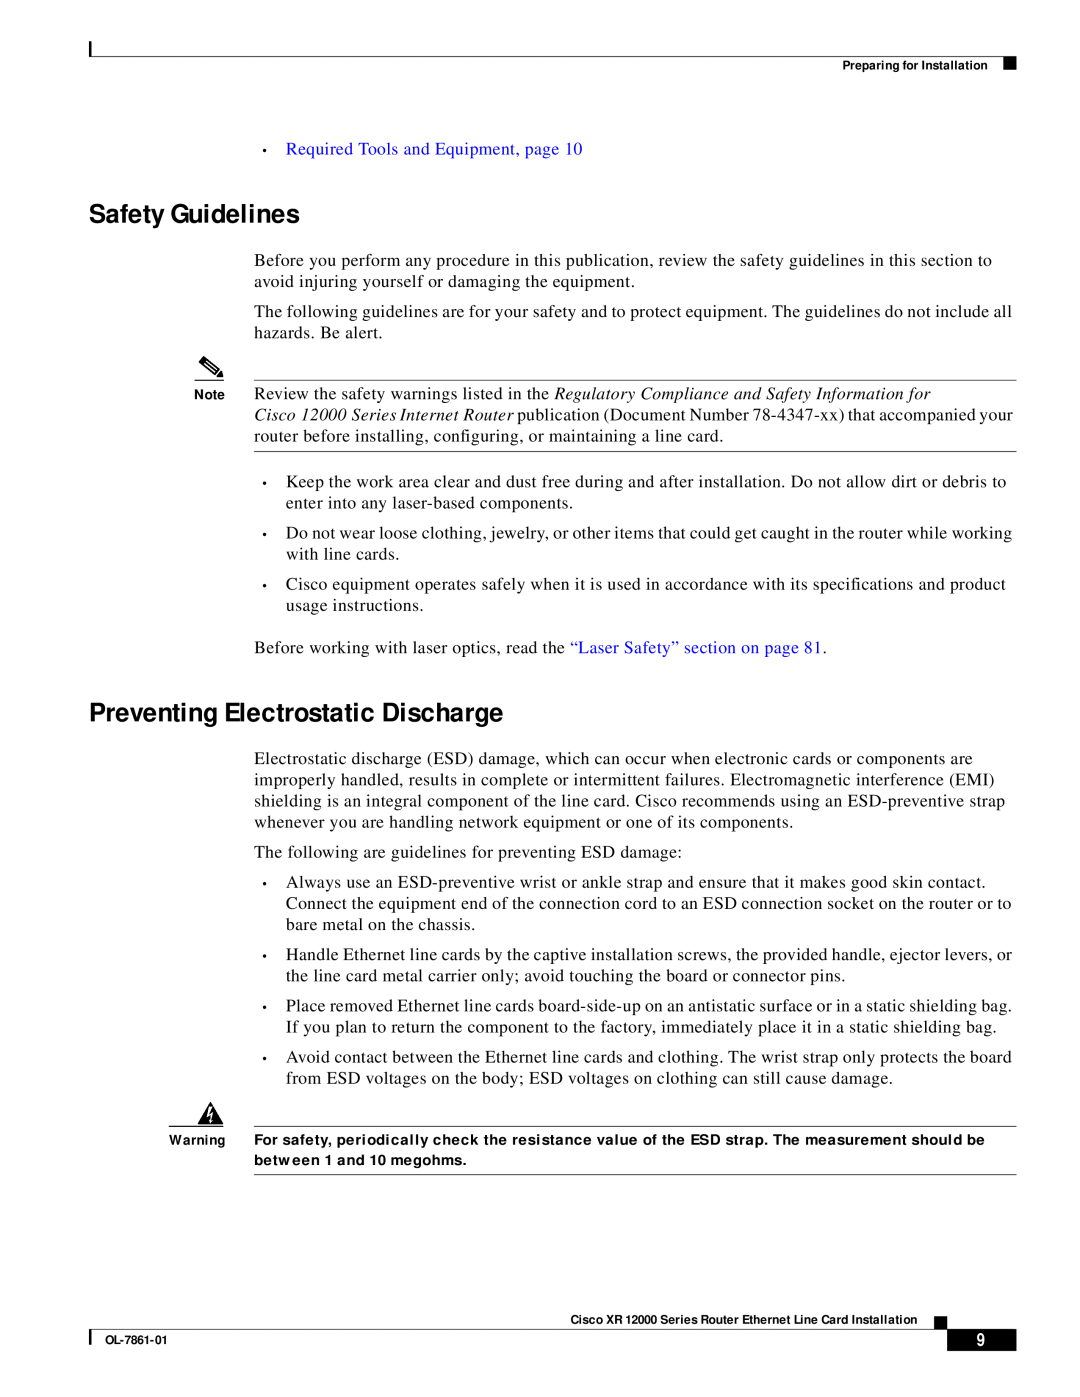 Cisco Systems OL-7861-01 manual Safety Guidelines, Preventing Electrostatic Discharge, Required Tools and Equipment, page 